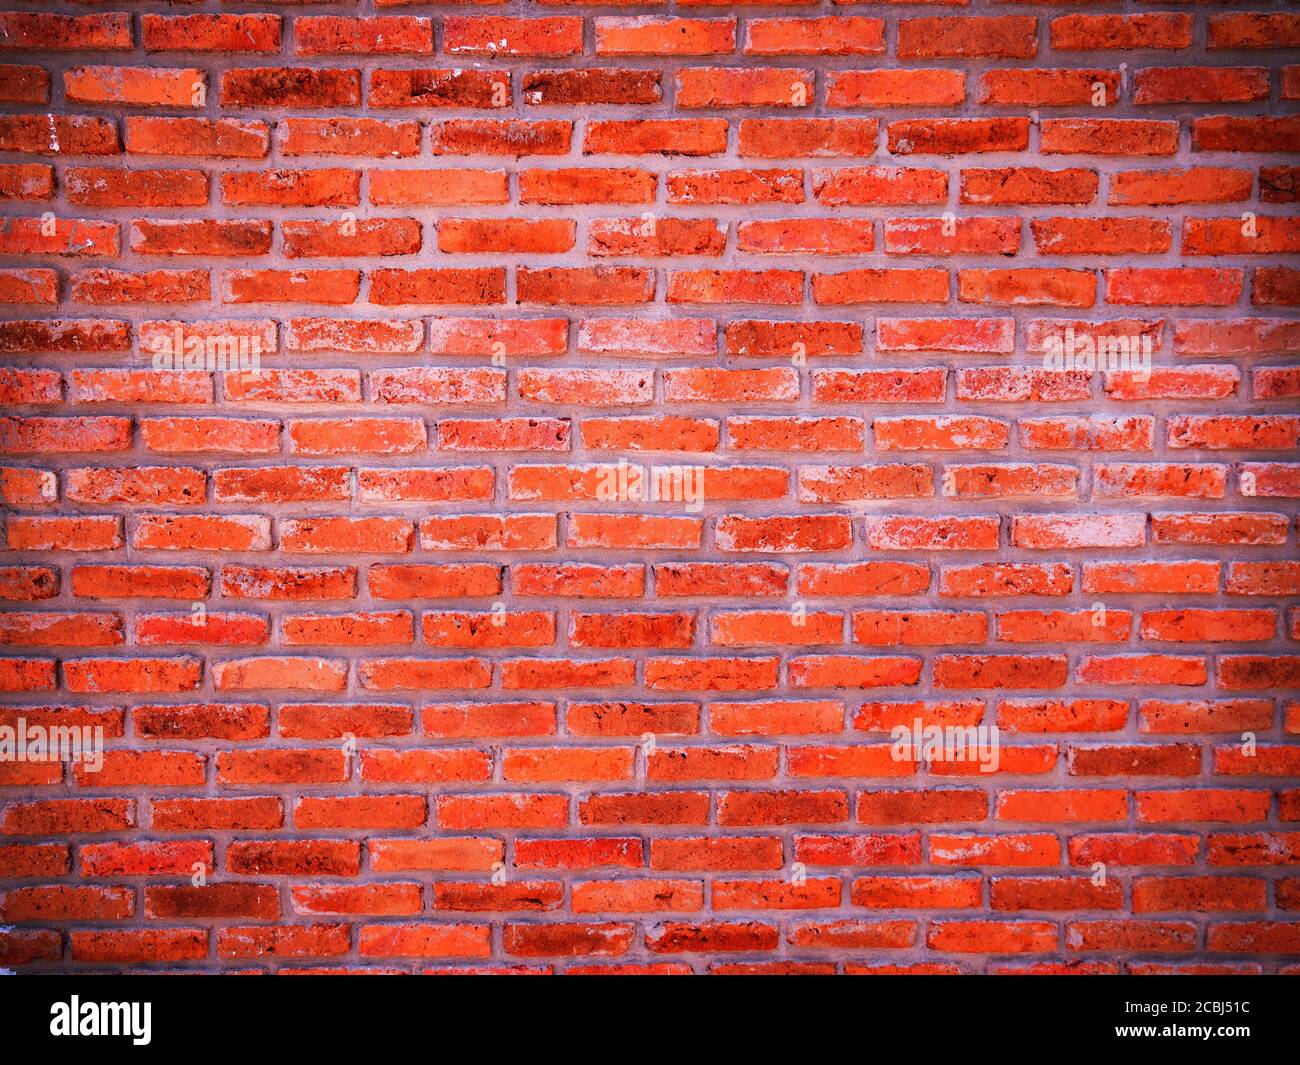 Background of abstract old grunge red brick wall pattern texture. Great for graffiti inscriptions. Stock Photo